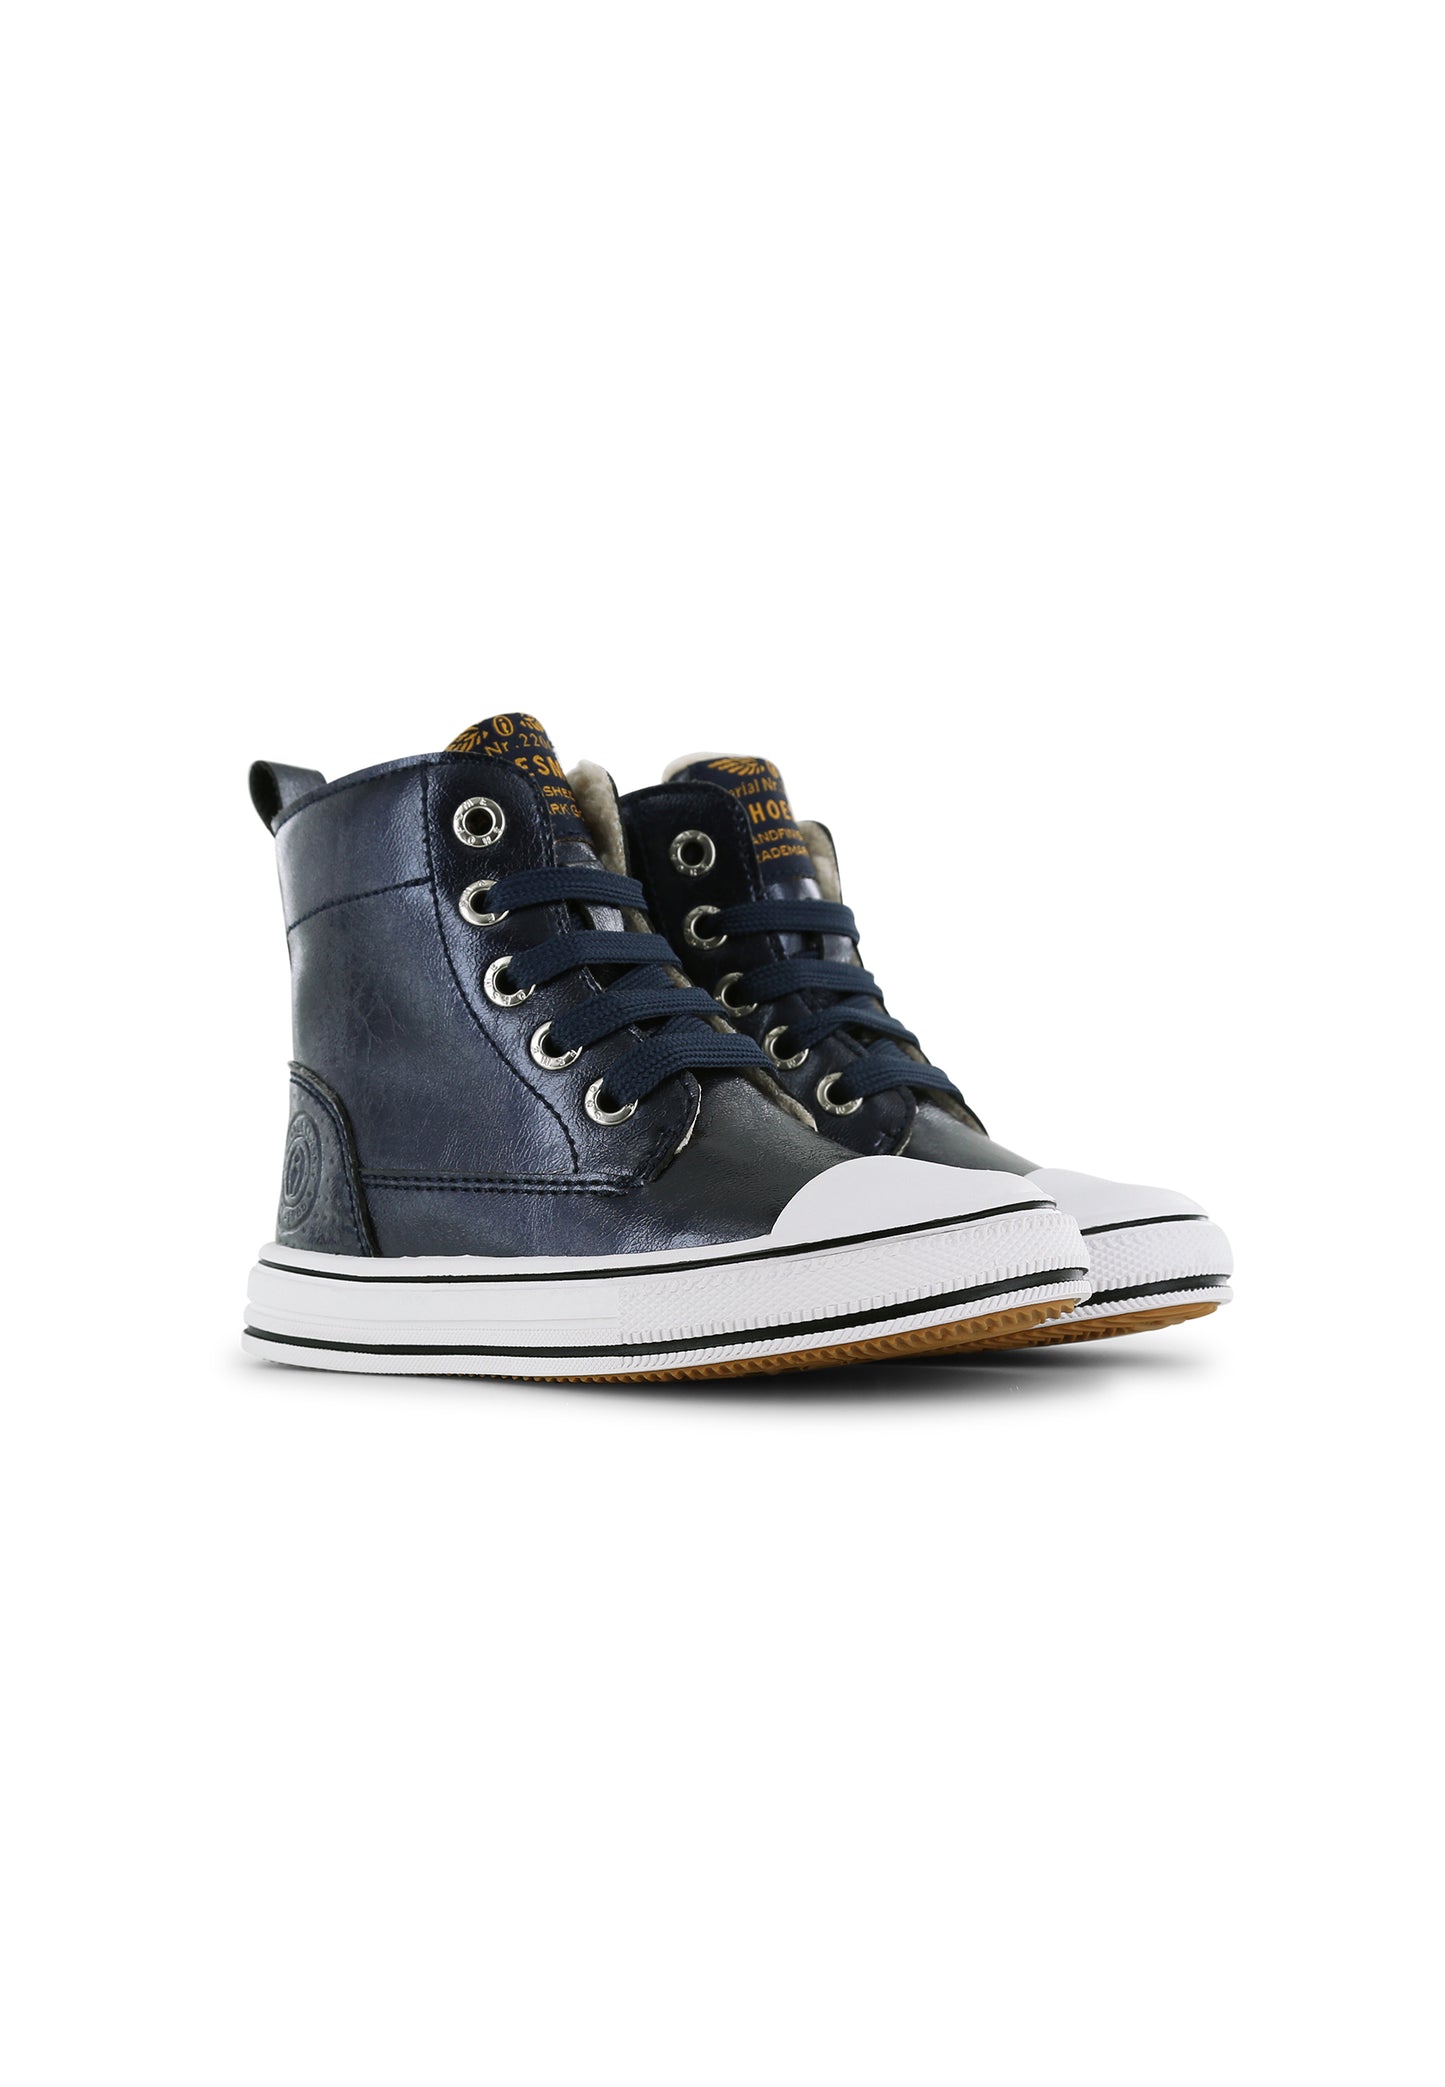 Omero Blue Metallic Zipped and Lace Fleece Lined High Top